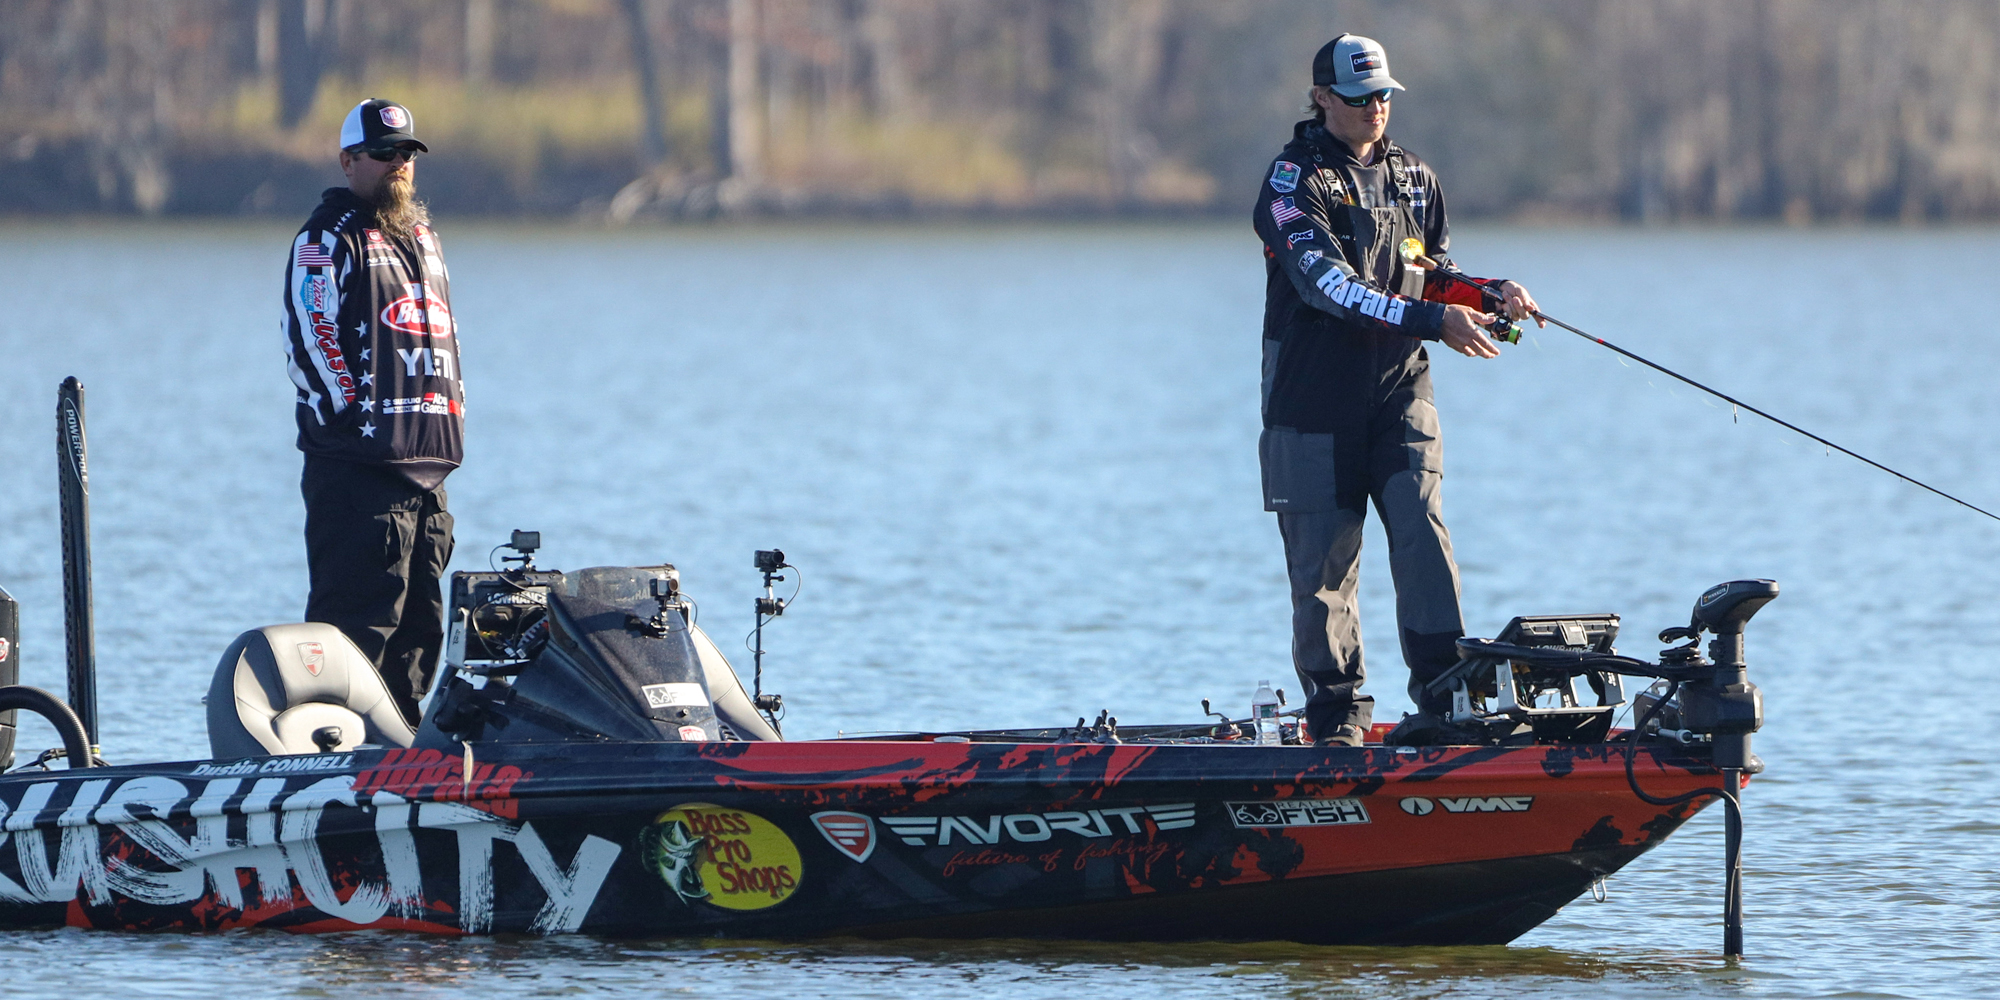 Dustin Connell cruises to Group B lead at Bass Pro Tour B&W